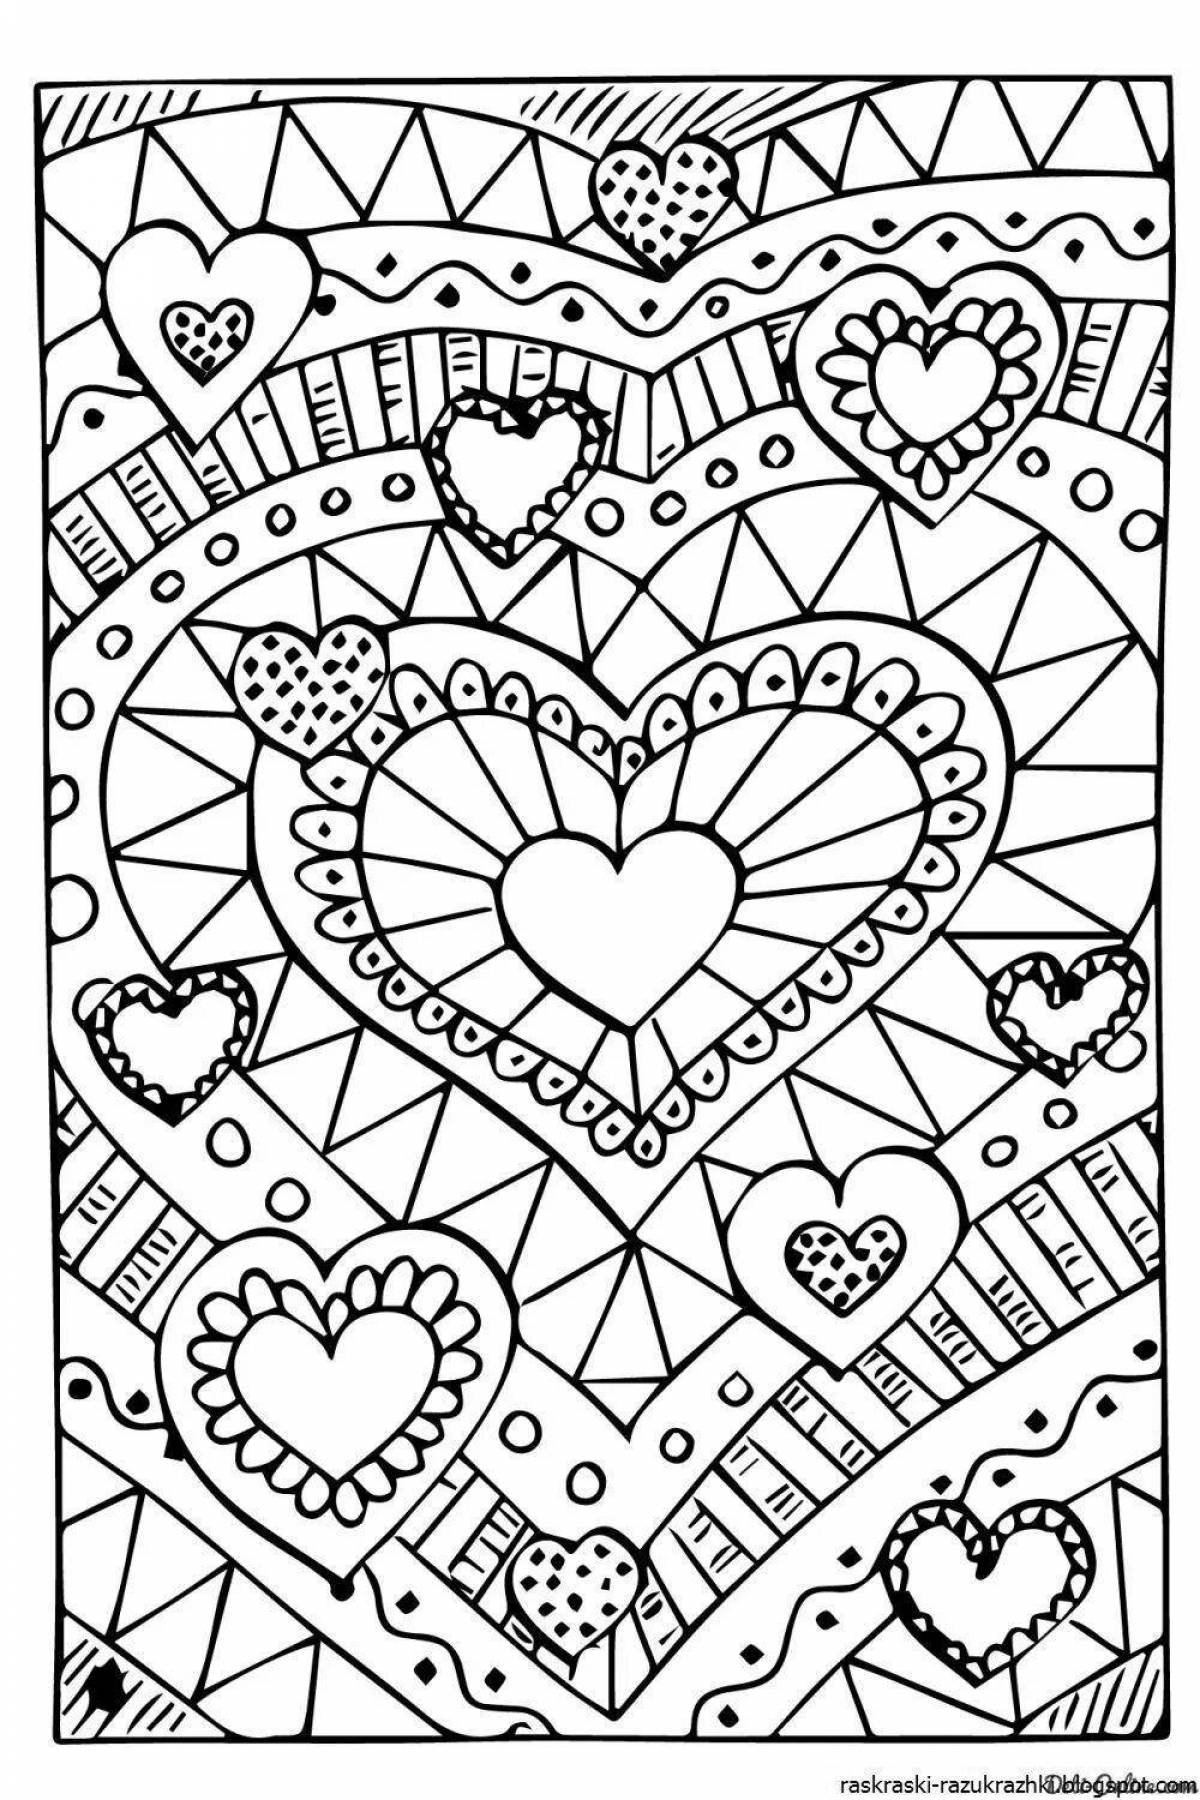 Accurate coloring page 11 years difficult